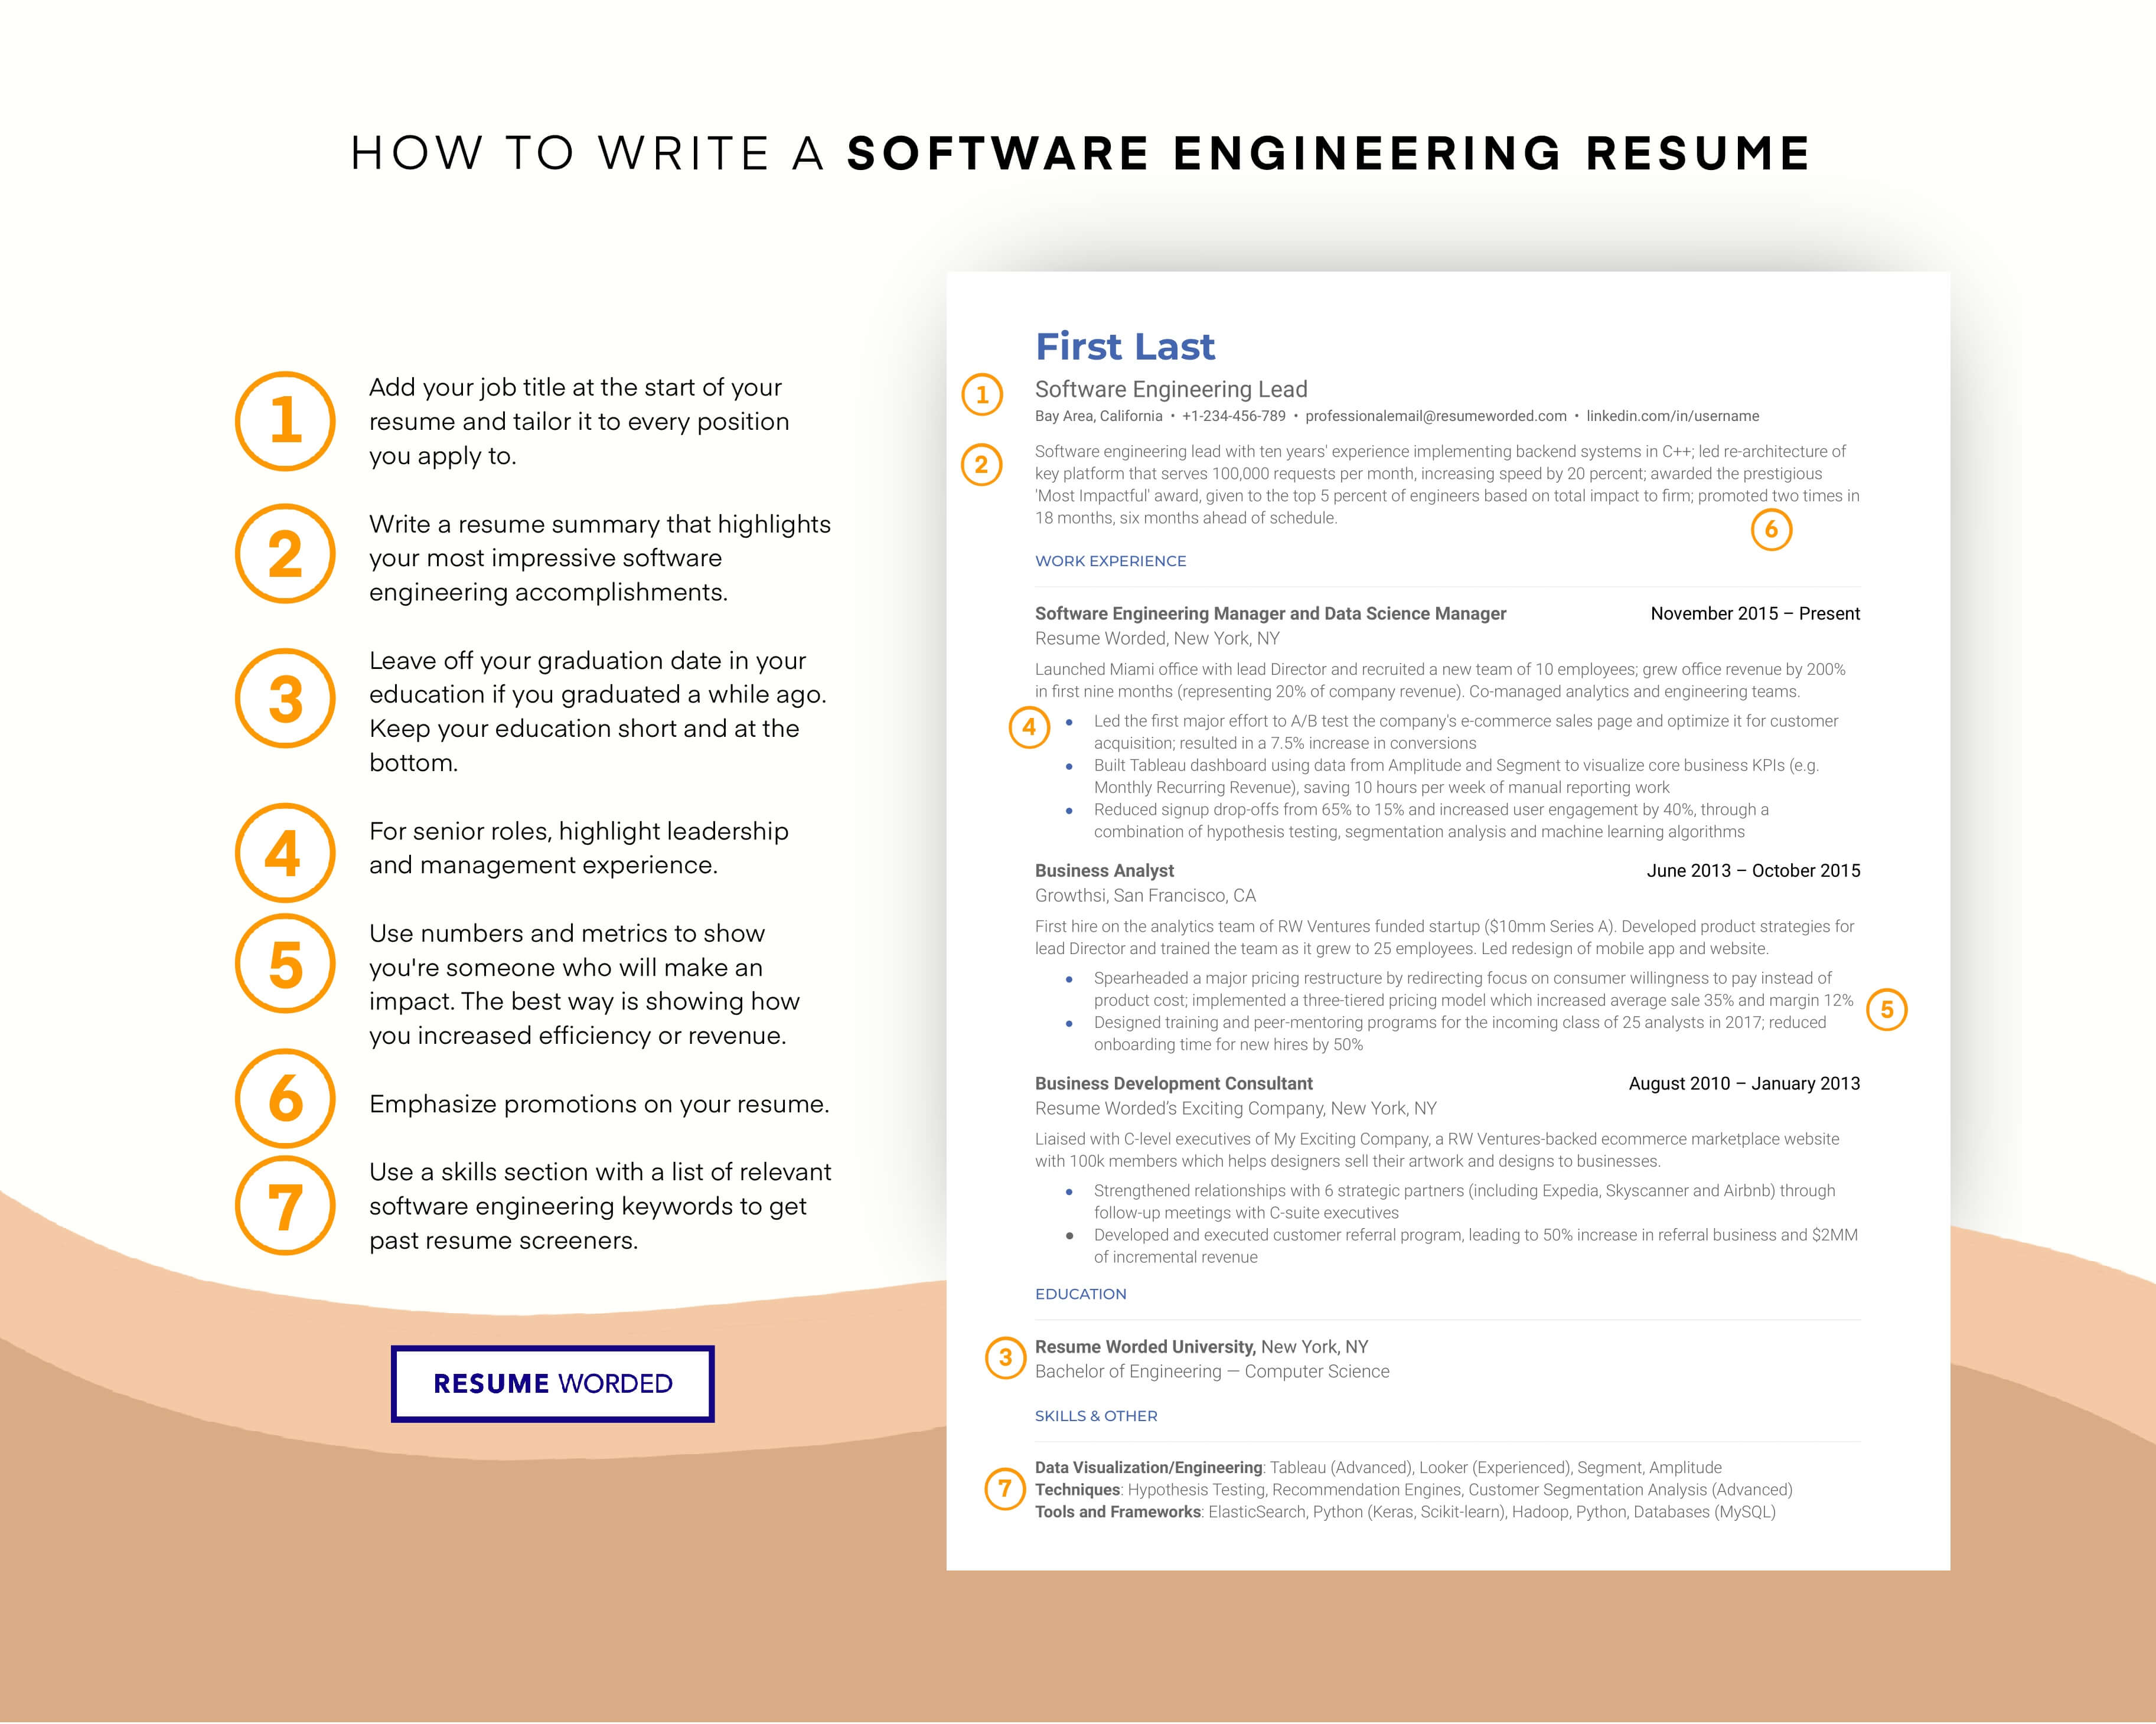 Showcase your knowledge of recruitment software - Entry-Level Recruiter CV